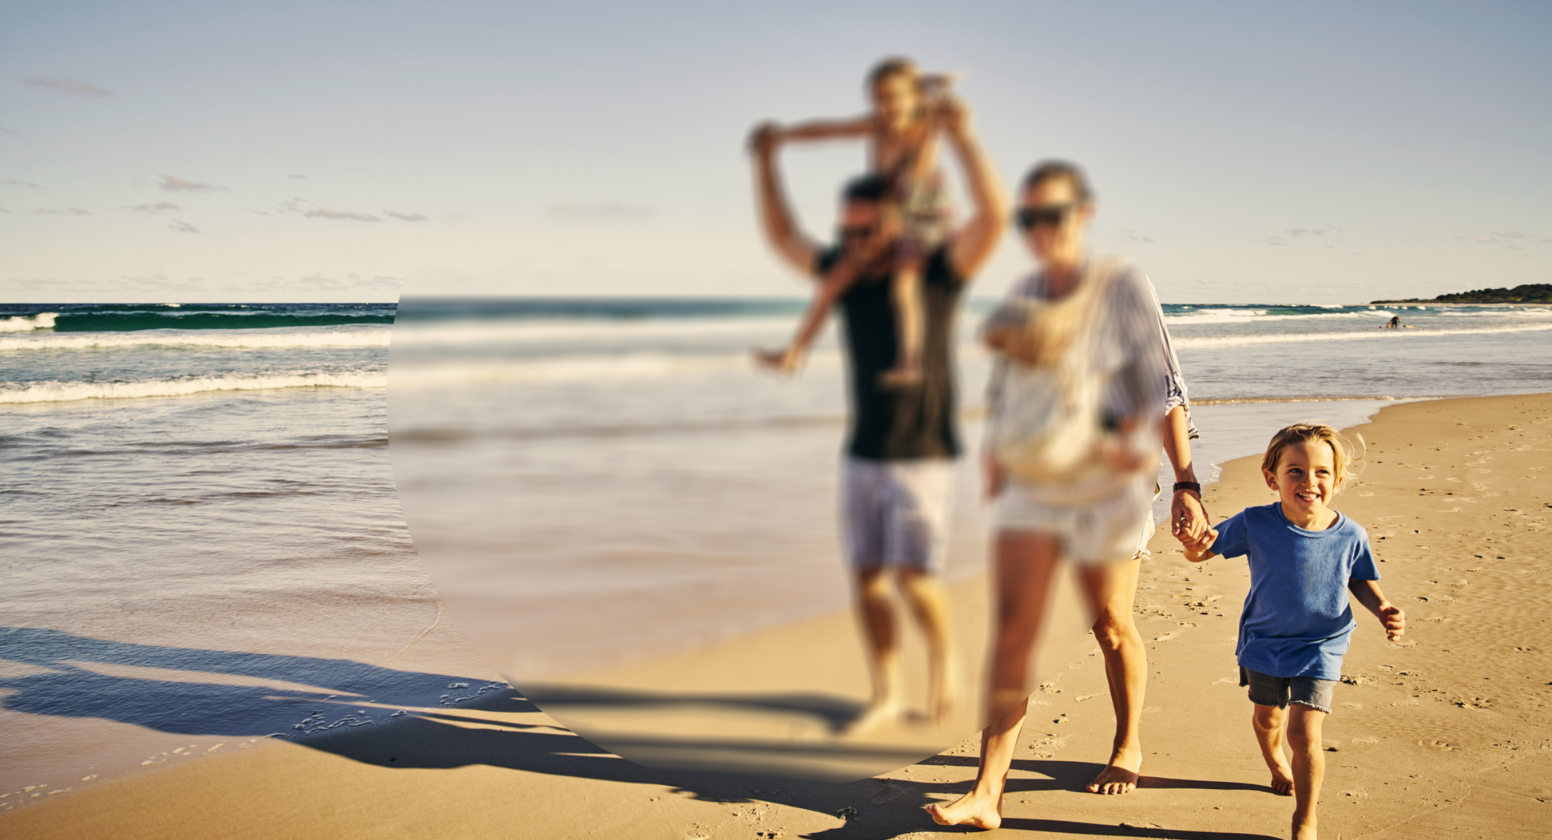 Age-related macular degeneration: Image of a happy family walking on the beach where the vision is blurred on one side of the periphery.